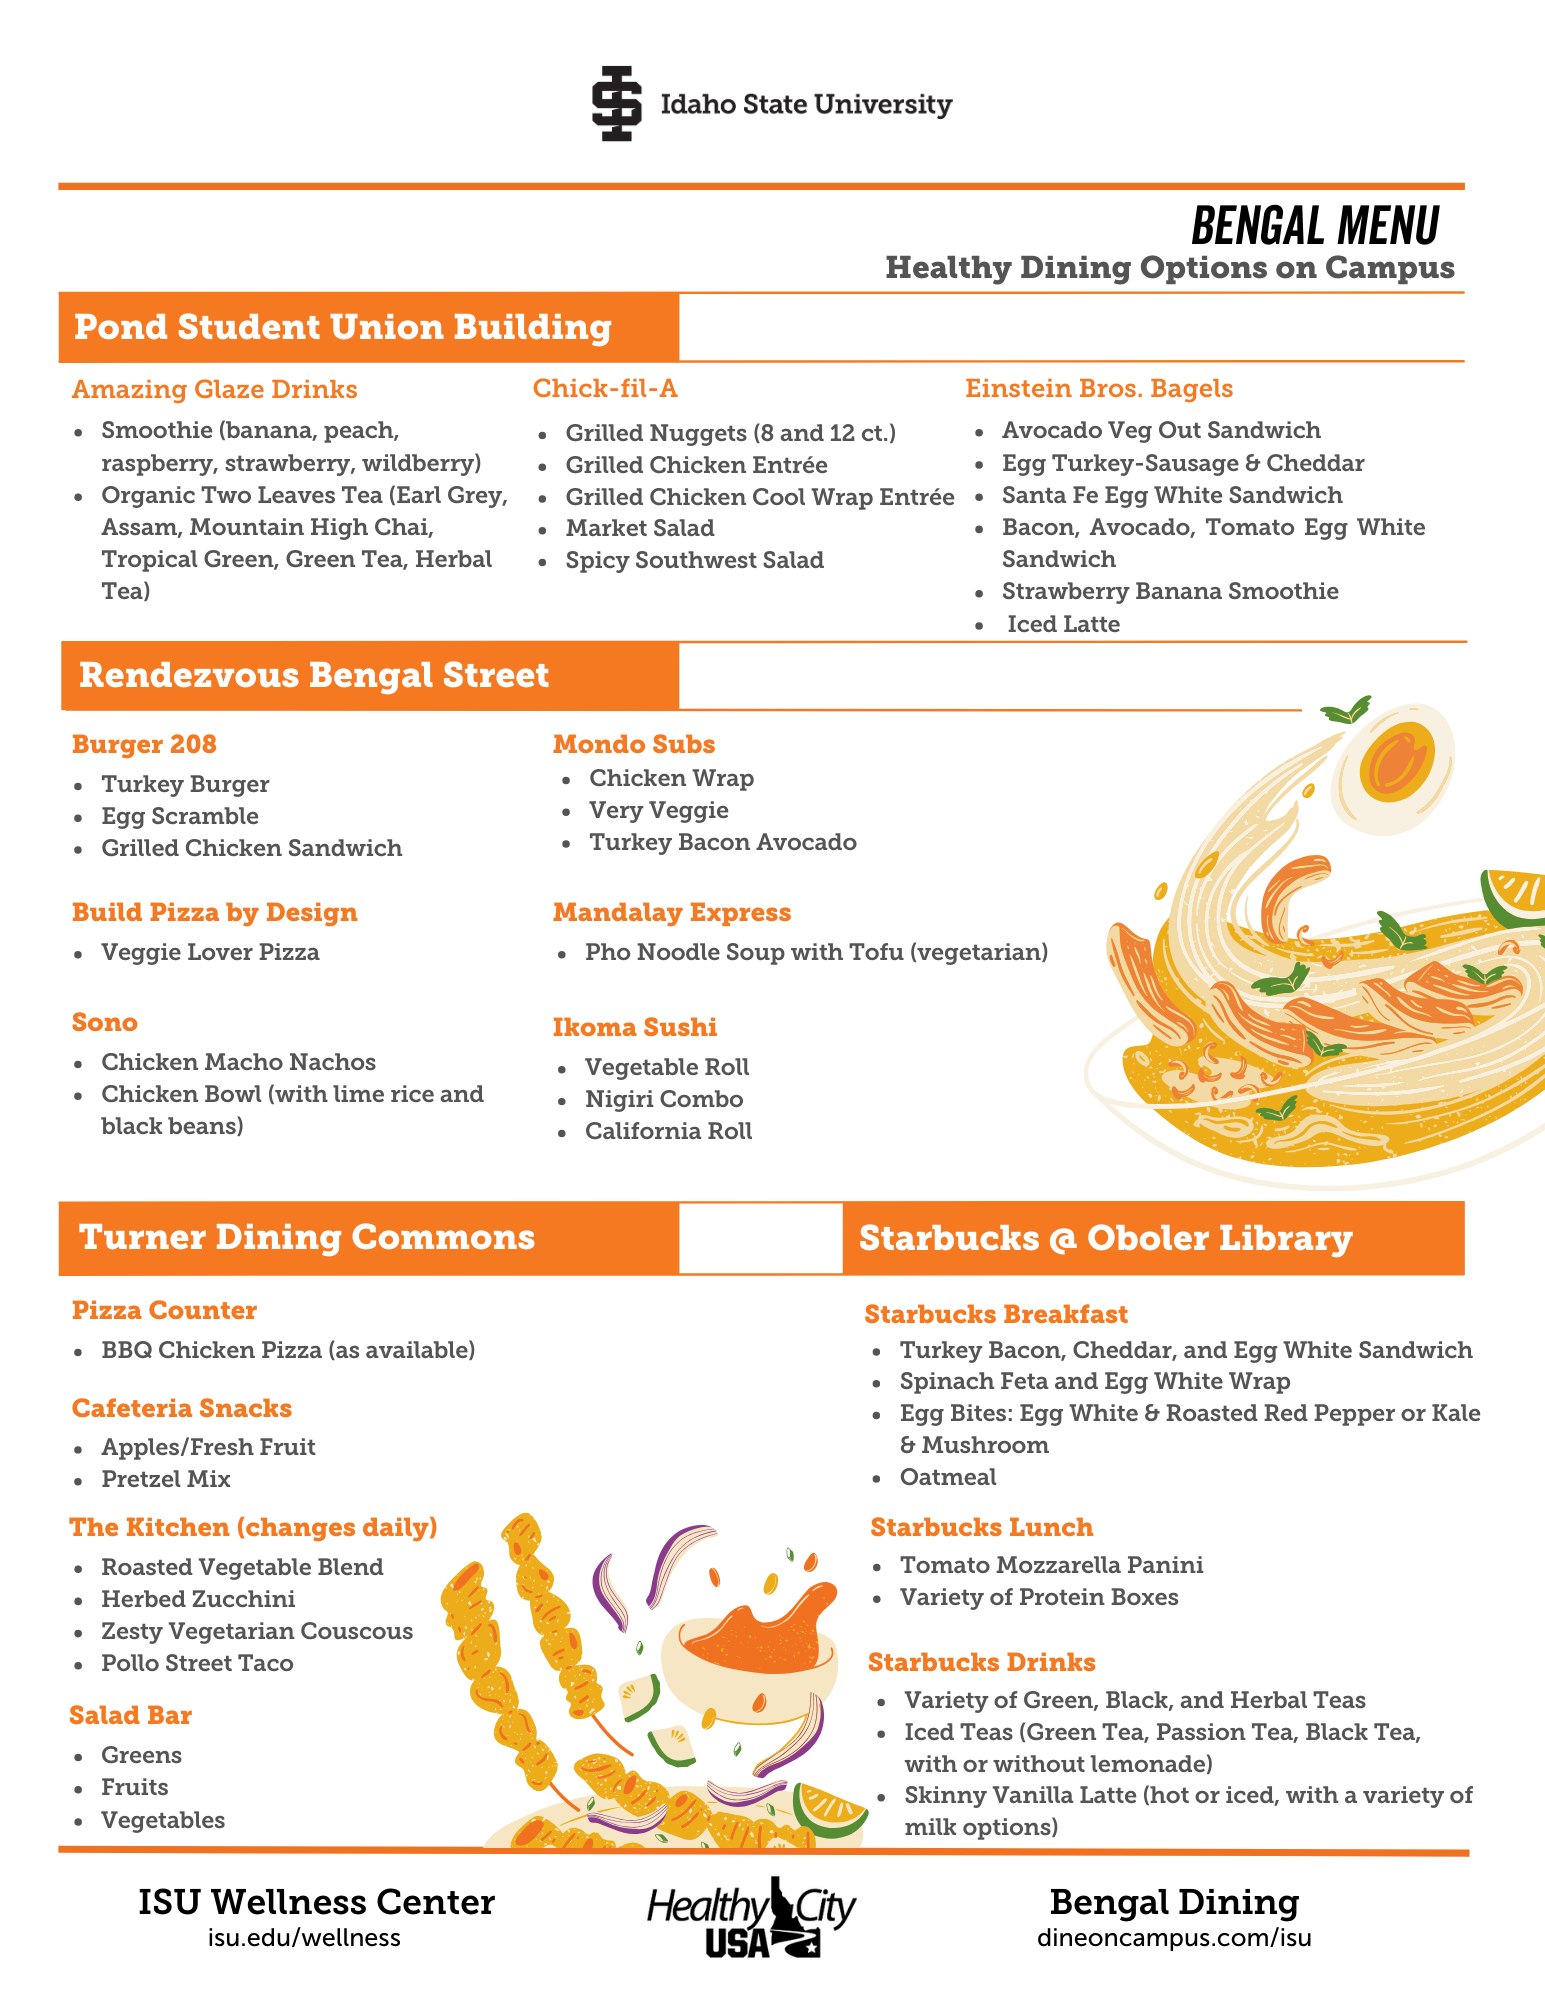 Menu of healthy dining options on campus.